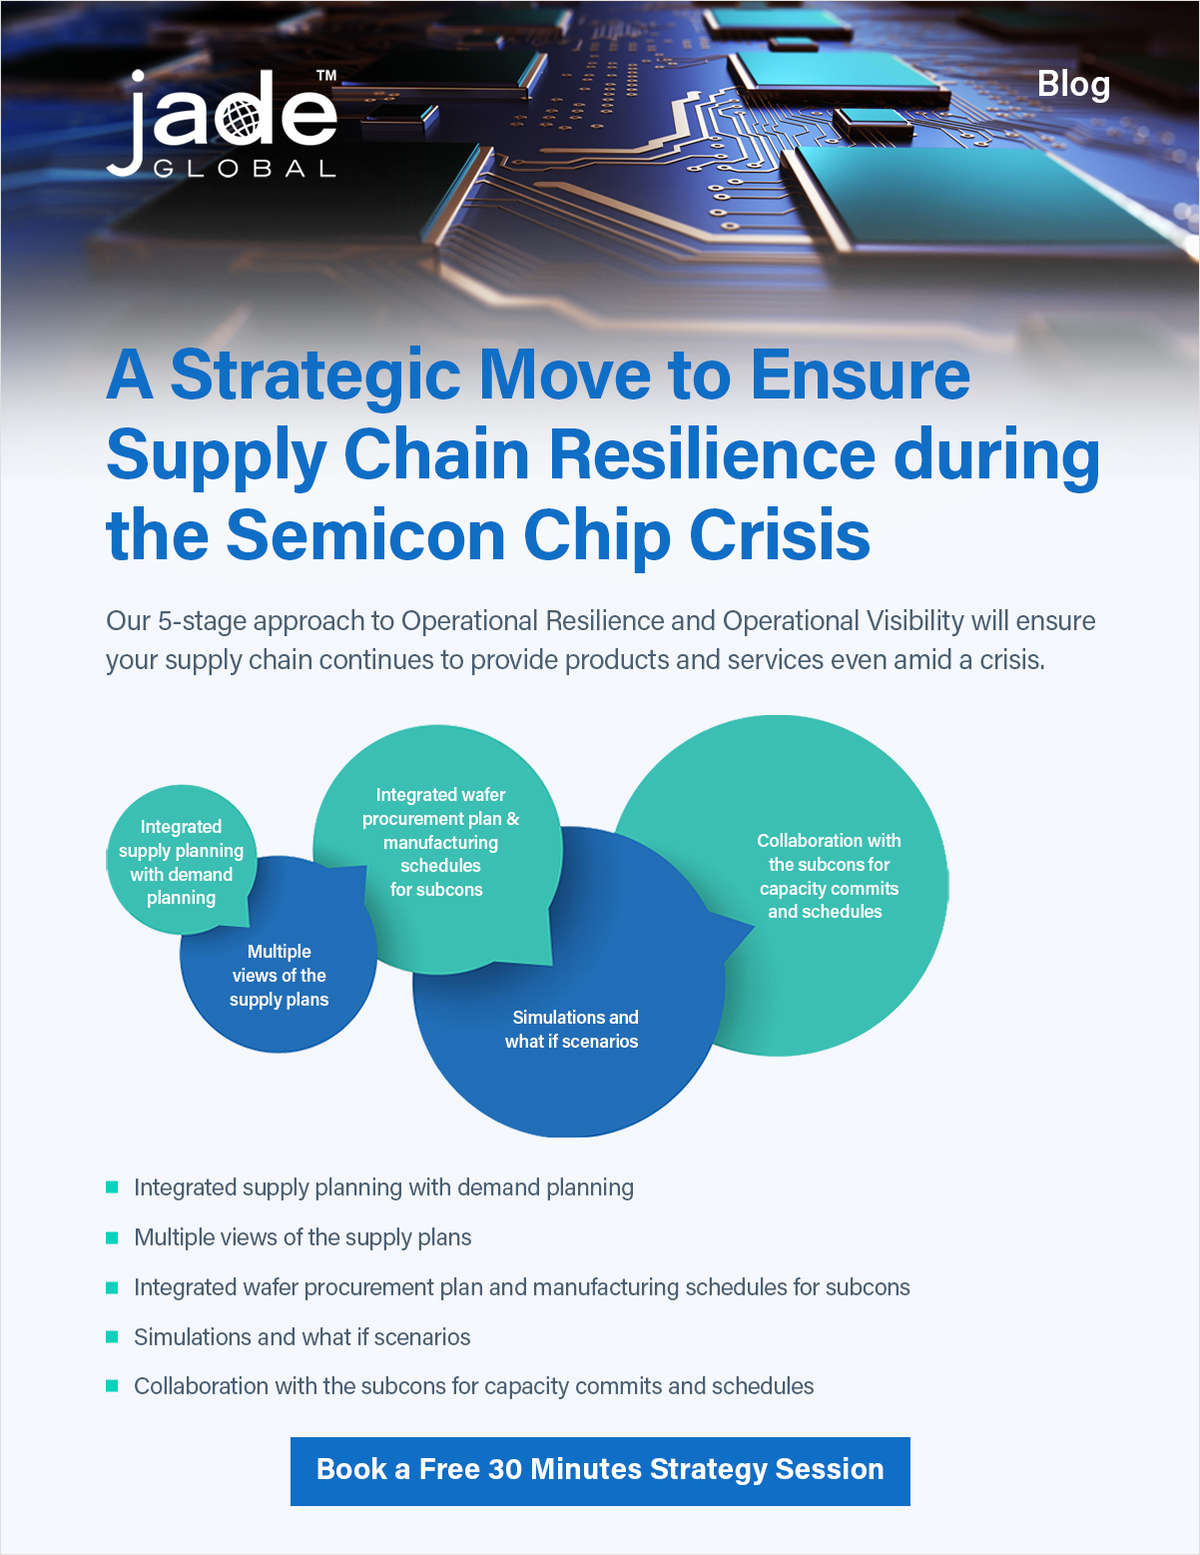 [Blog] - A Strategic Move to Ensure Supply Chain Resilience during the Semicon Chip Crisis